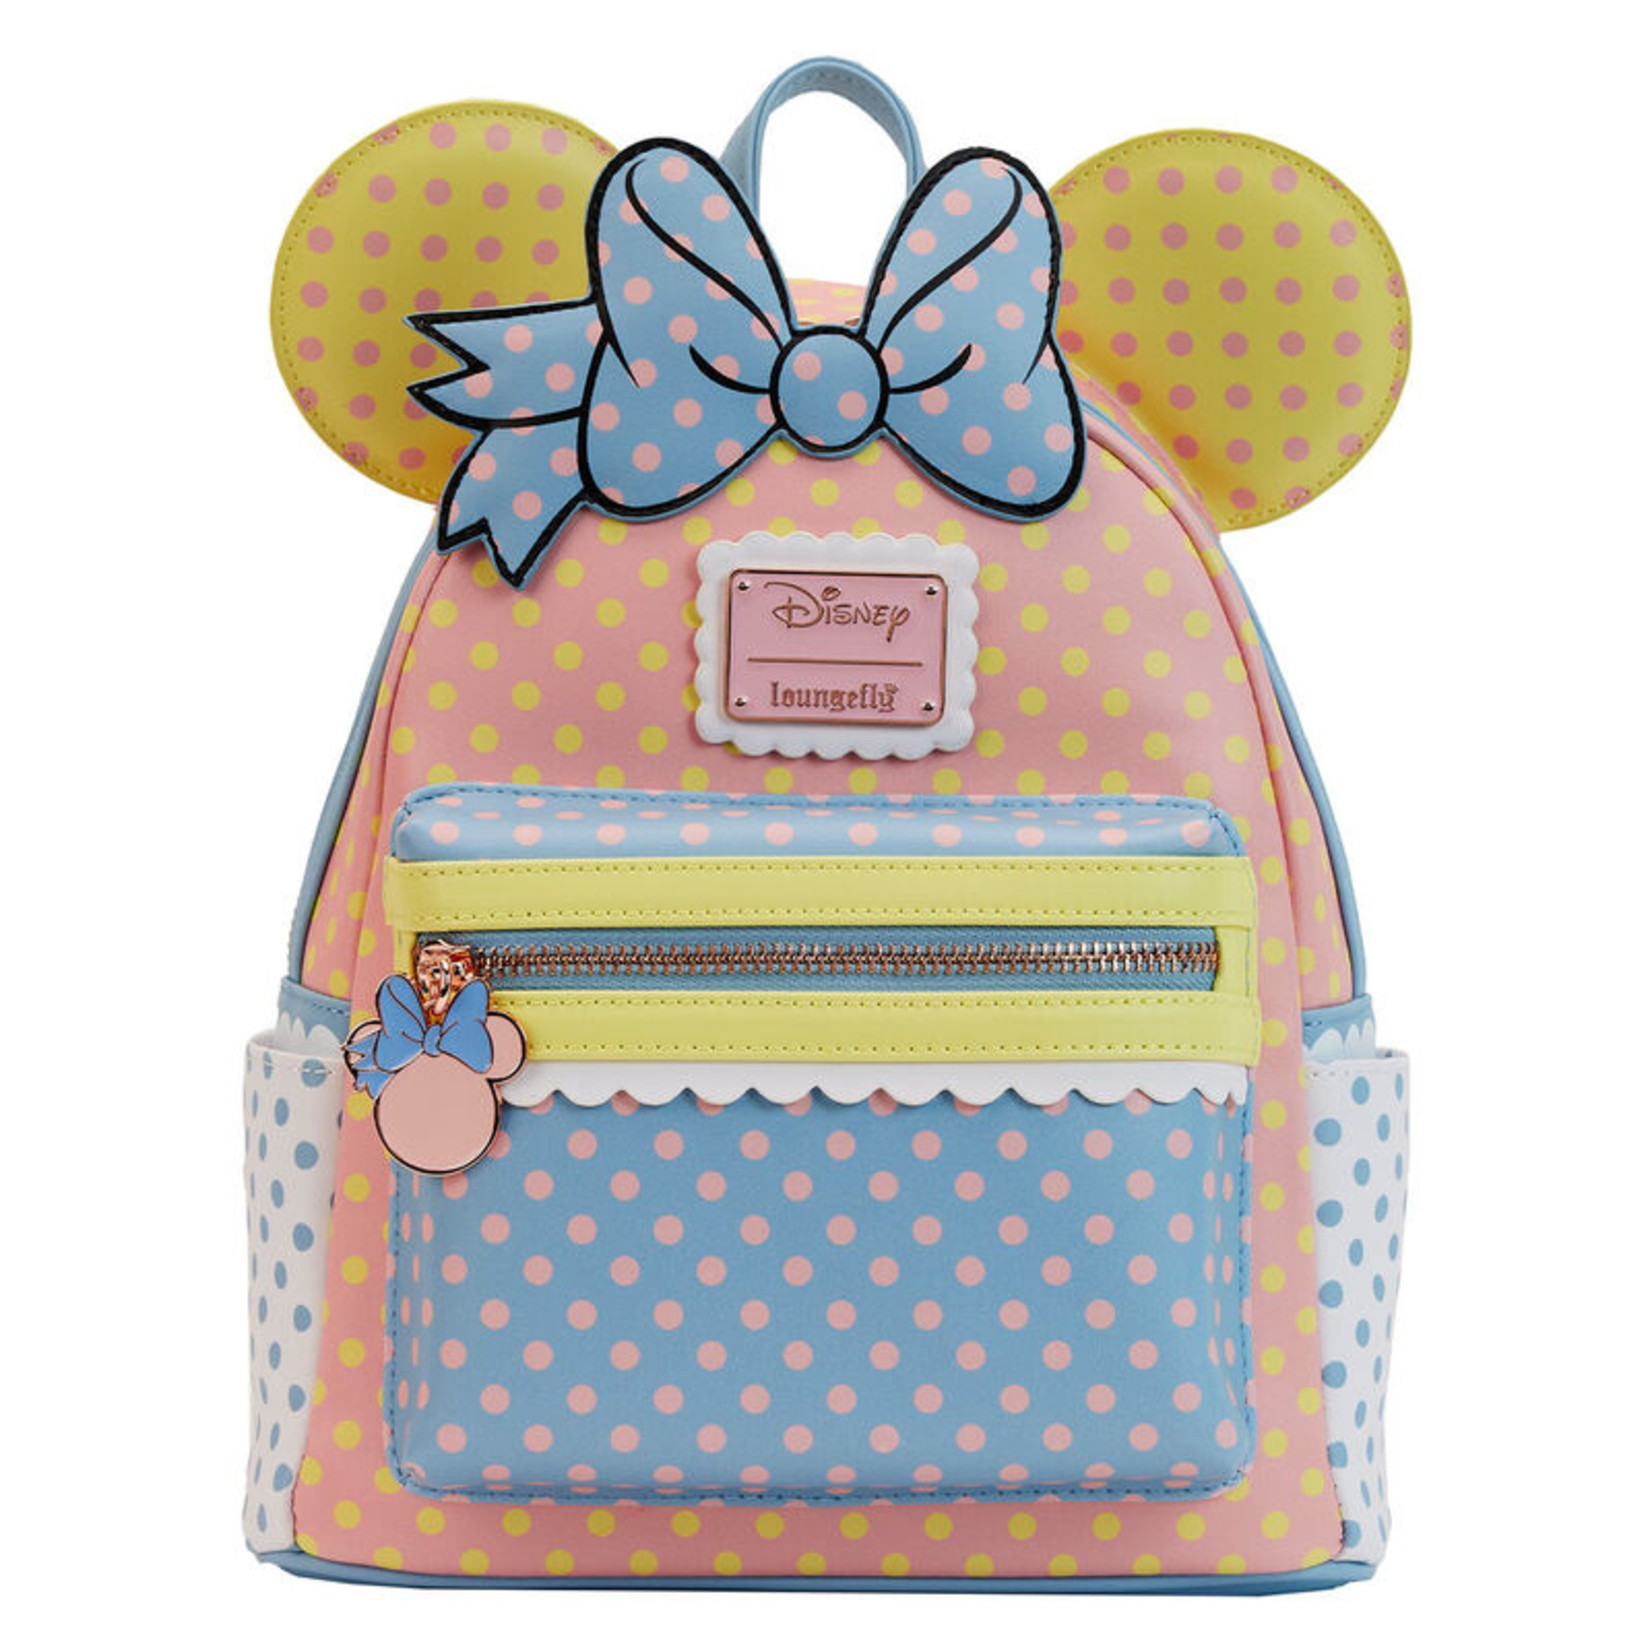 Loungefly Loungefly Disney Minnie Mouse Pastel Polka Dot Backpack 27cm